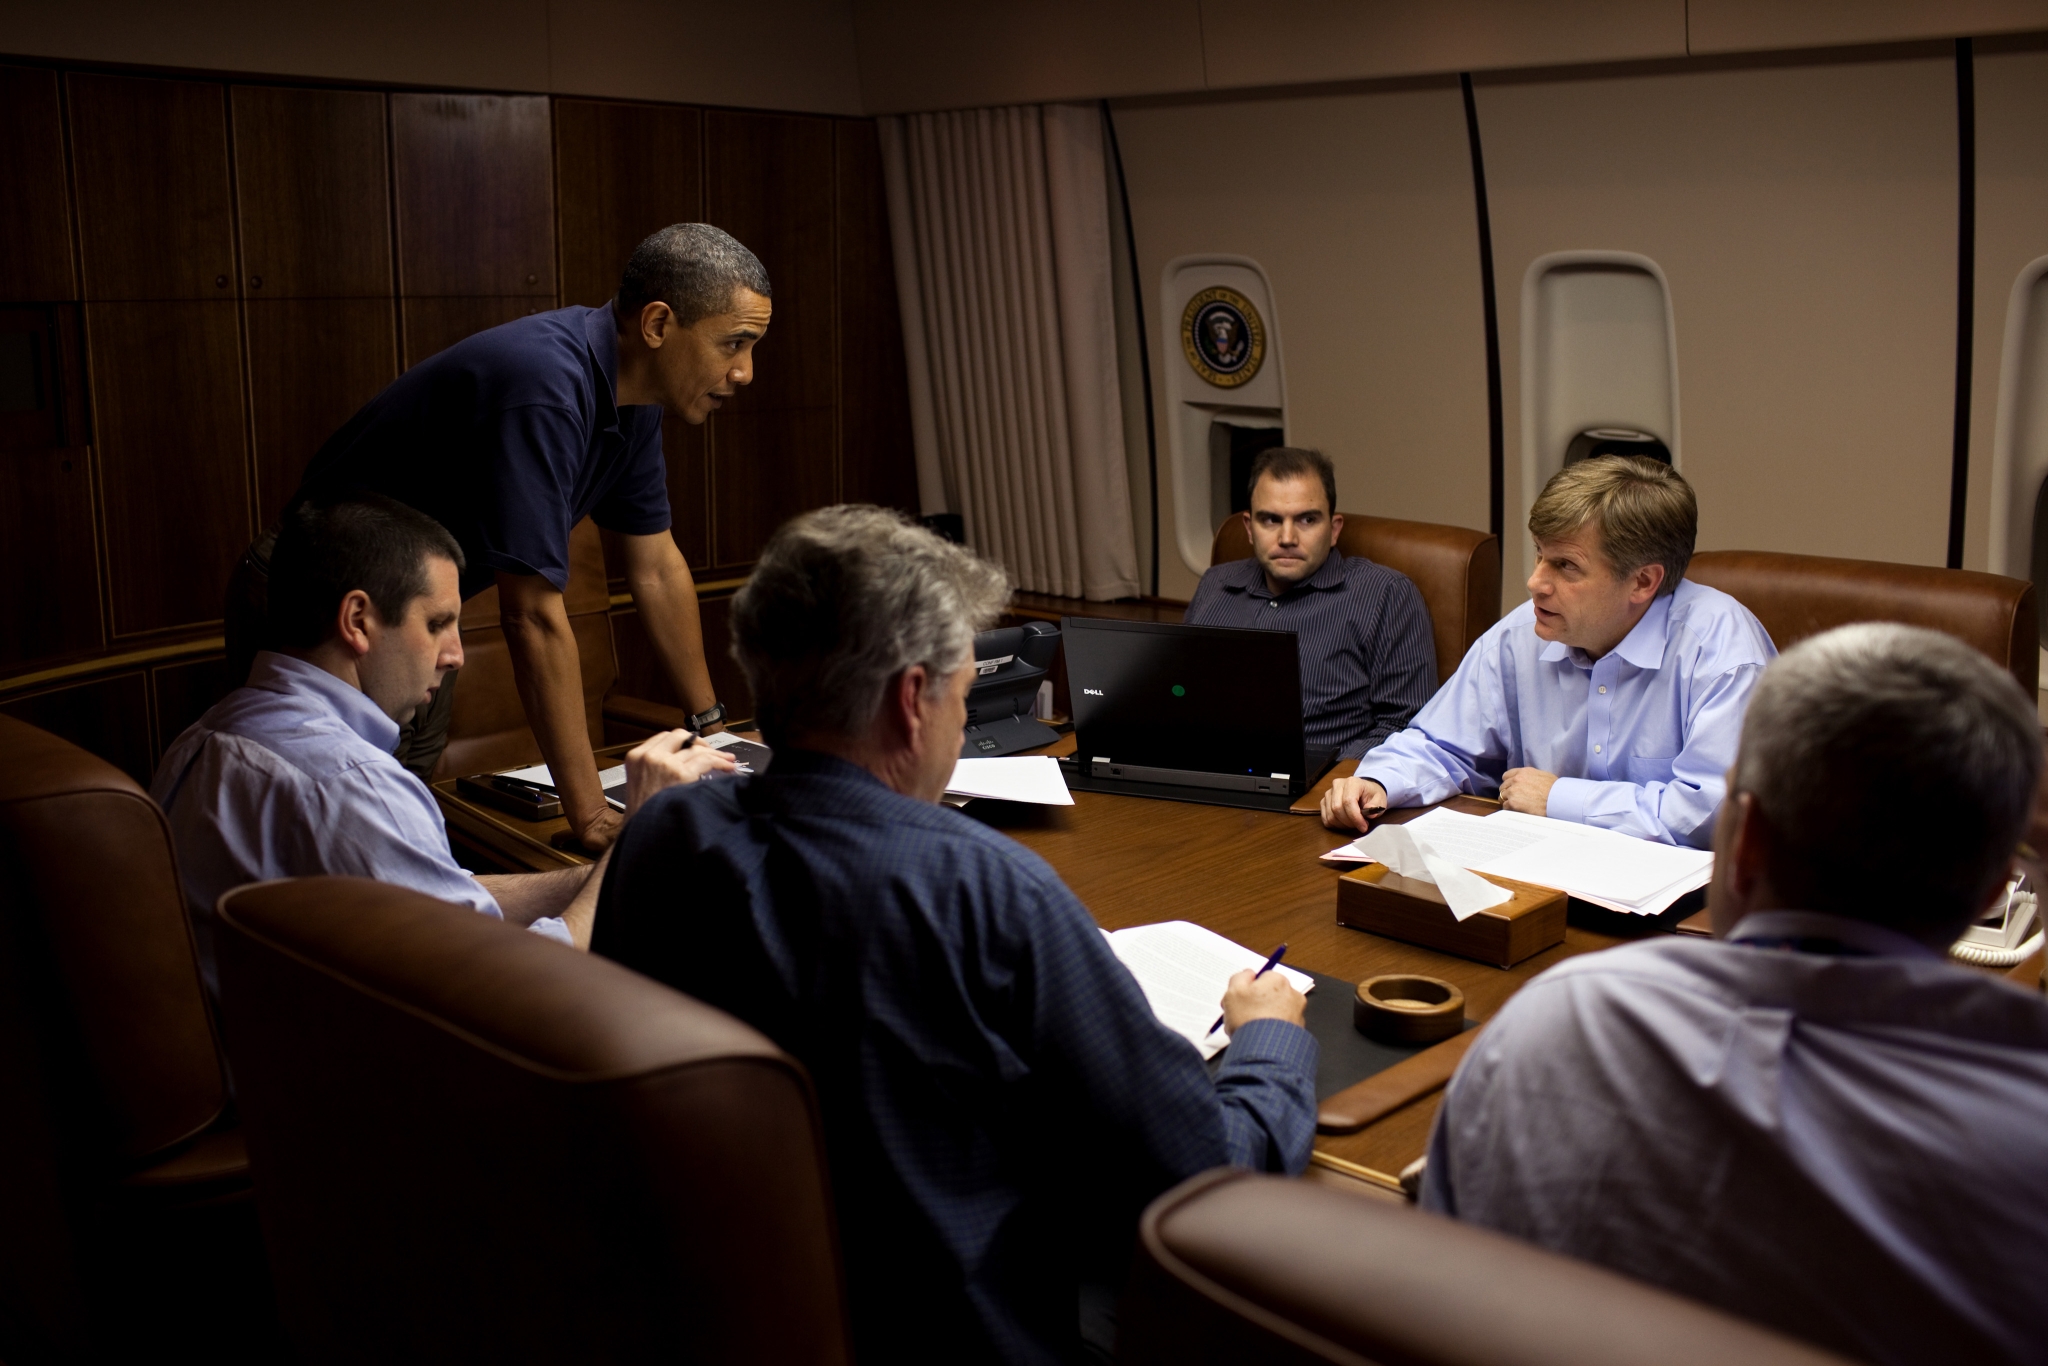 President Barack Obama is briefed by, from left, NSC Chief of Staff Mark Lippert, Former U.S. Ambassador to Russia William J. Burns, Deputy National Security Advisor for Strategic Communications Ben Rhodes, NSC Senior Director for Russian Affairs Mike McFaul, and Deputy National Security Advisor for Strategic Communications Denis McDonough, in the Conference Room aboard Air Force One, during a flight to Moscow, Russia, July 5, 2009. (Official White House Photo by Pete Souza)